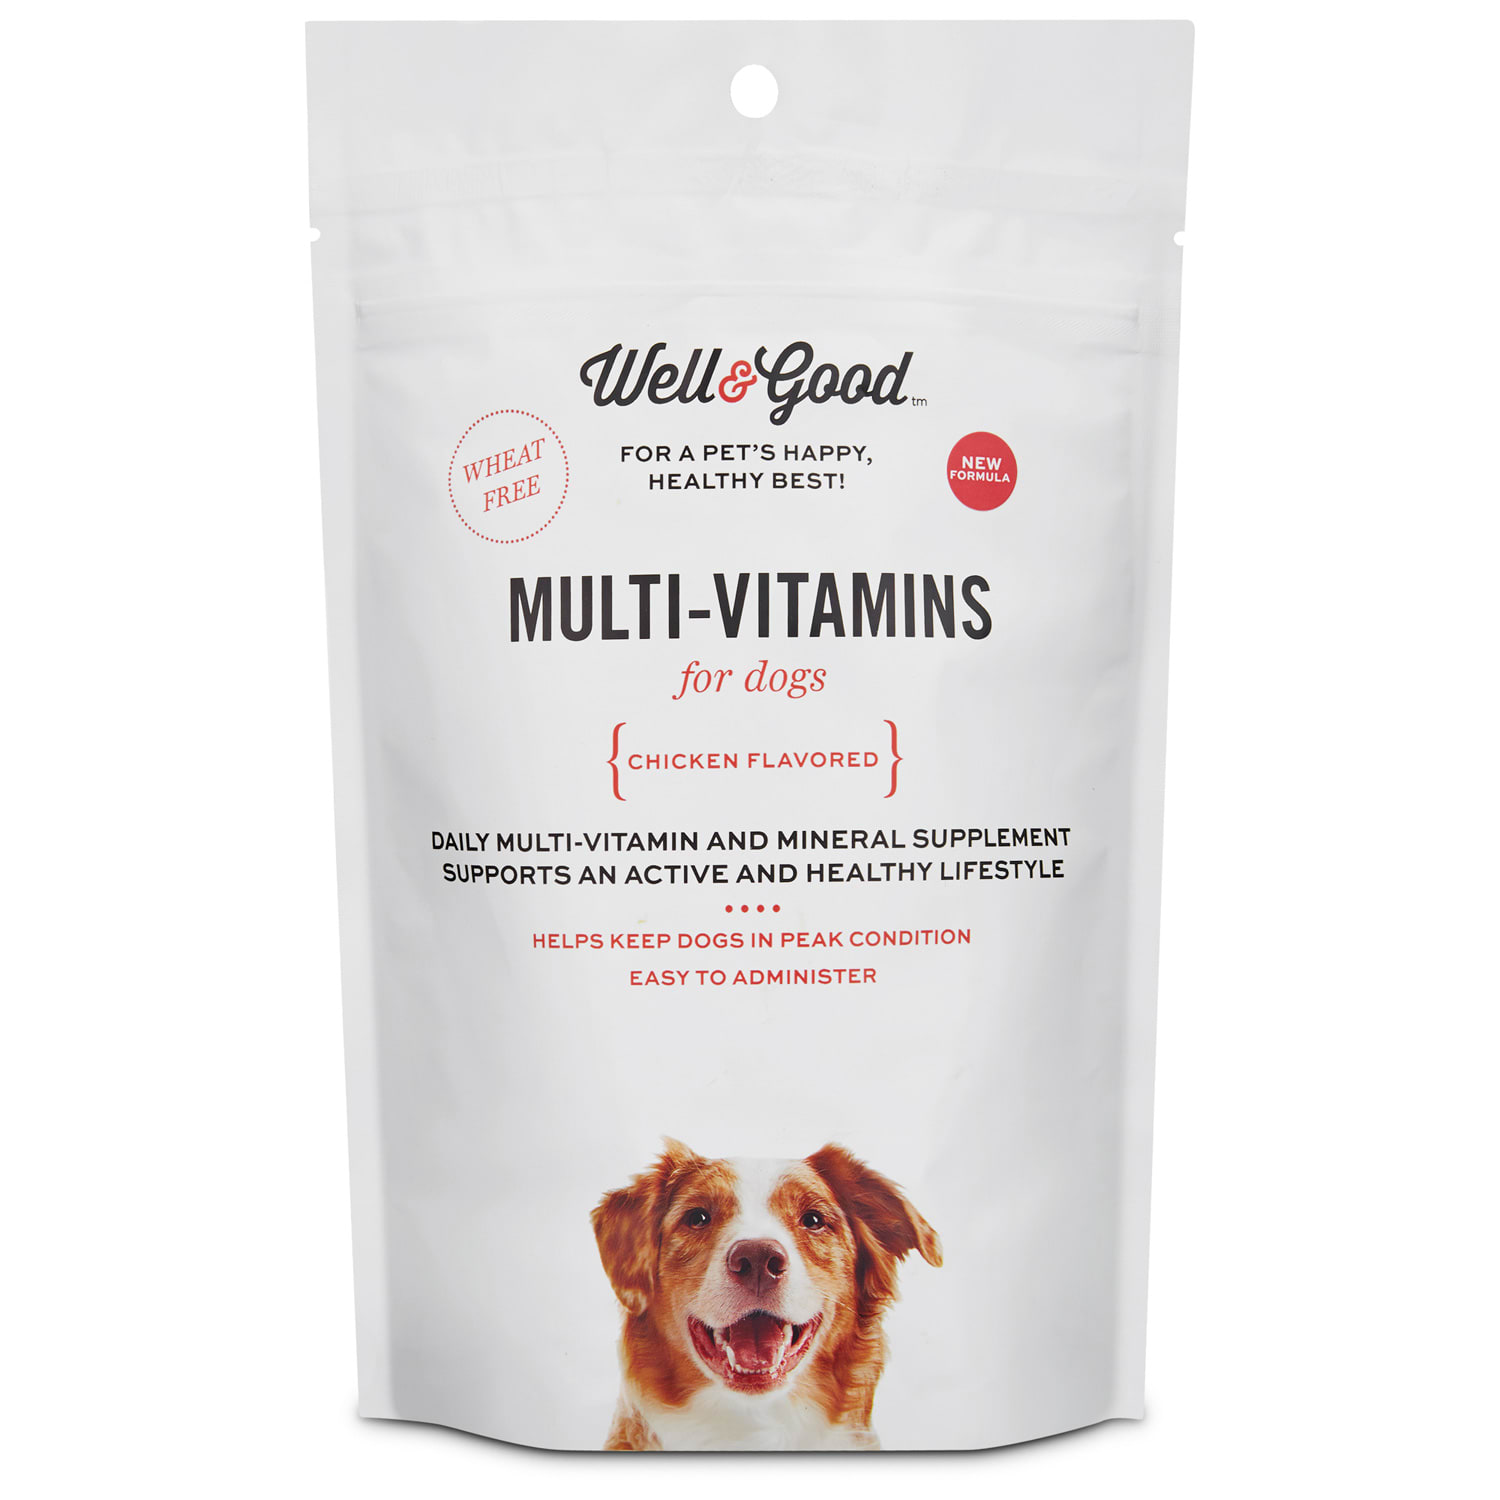 Well Good Chicken Flavored Daily Multivitamins For Adult Dogs Count Of 60 Petco